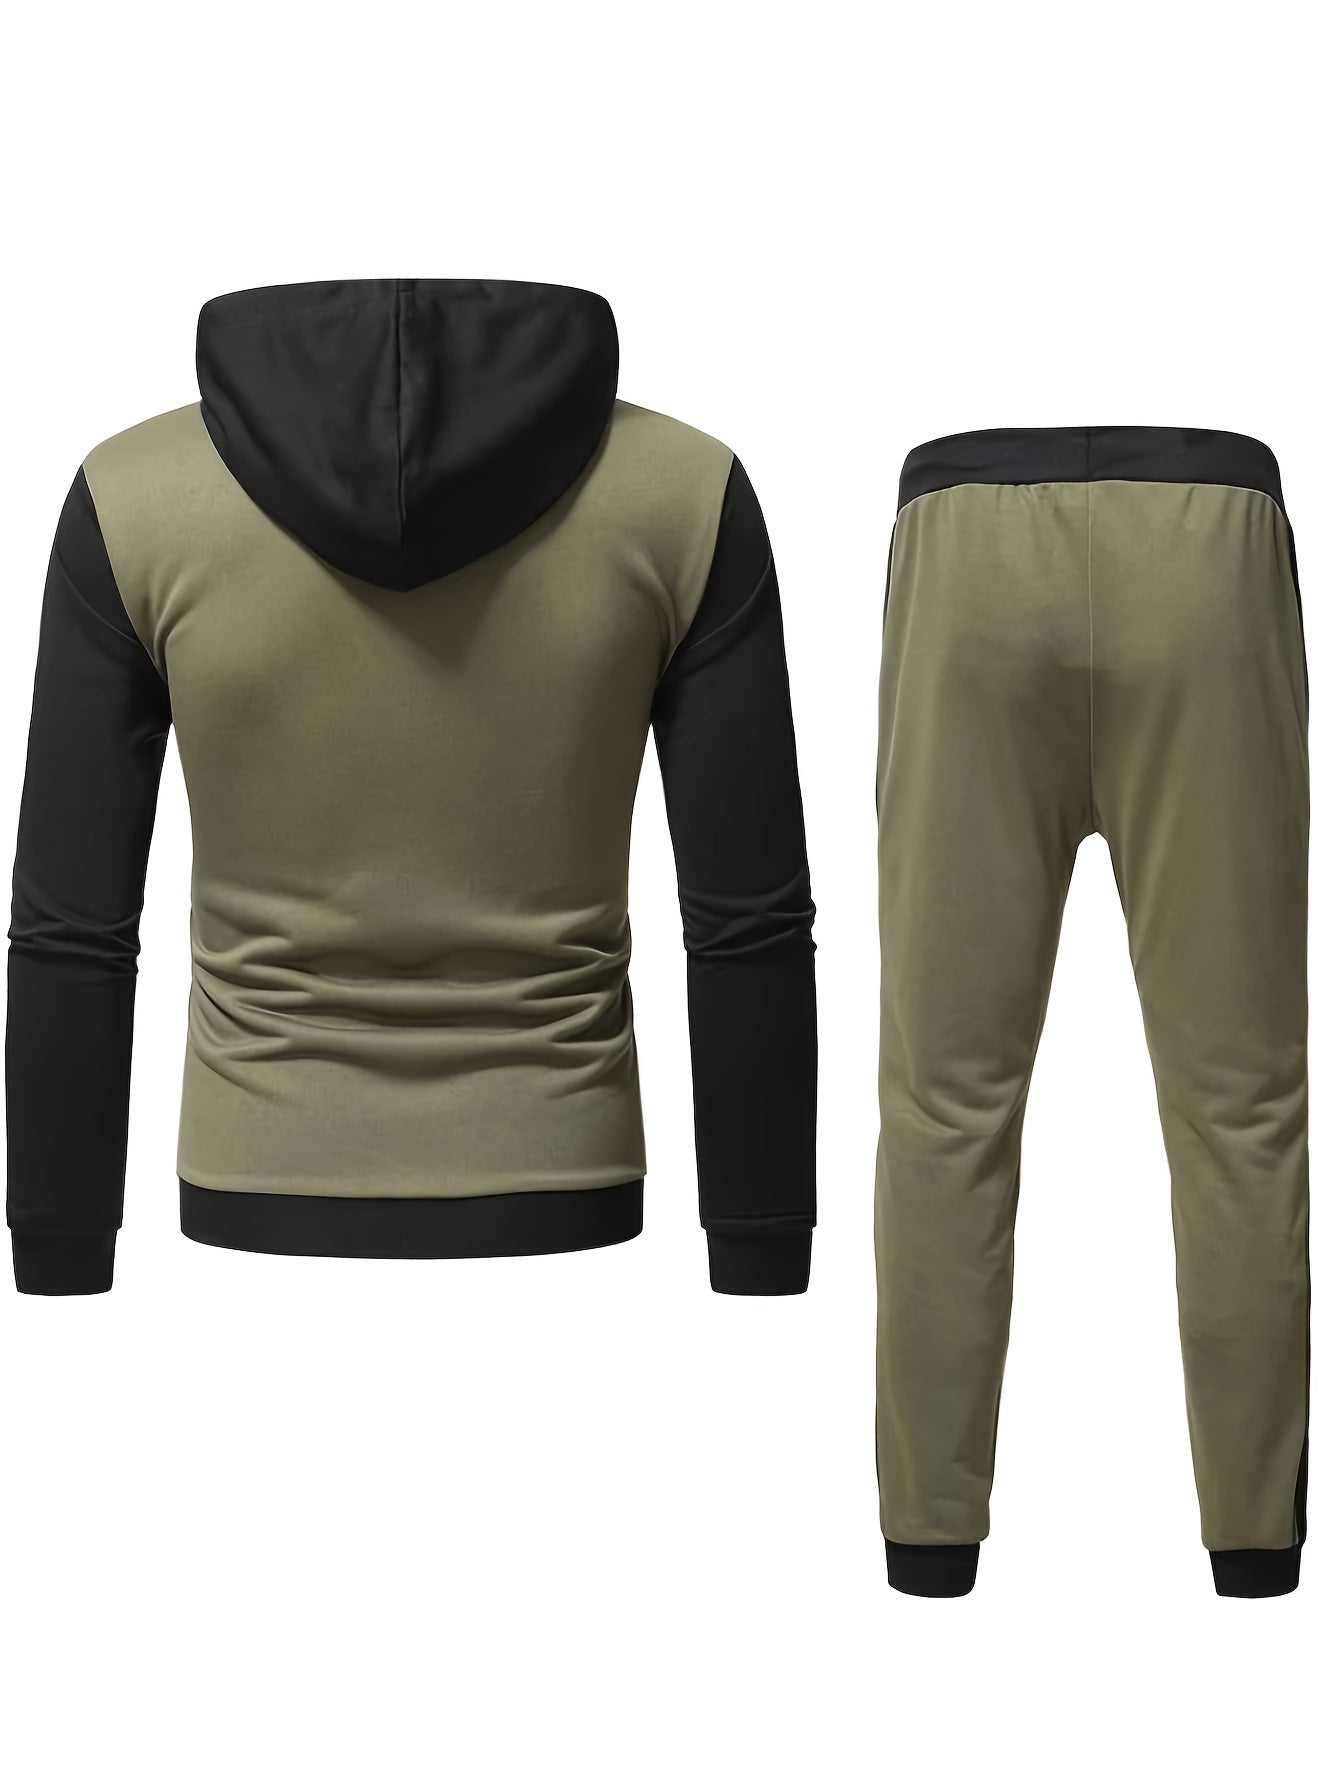 Color Block Classic Men's Athletic 2Pcs Tracksuit Set Casual Full-Zip Sweatsuits Long Sleeve Hoodie And Jogging Pants Set For Gym  Workout Running